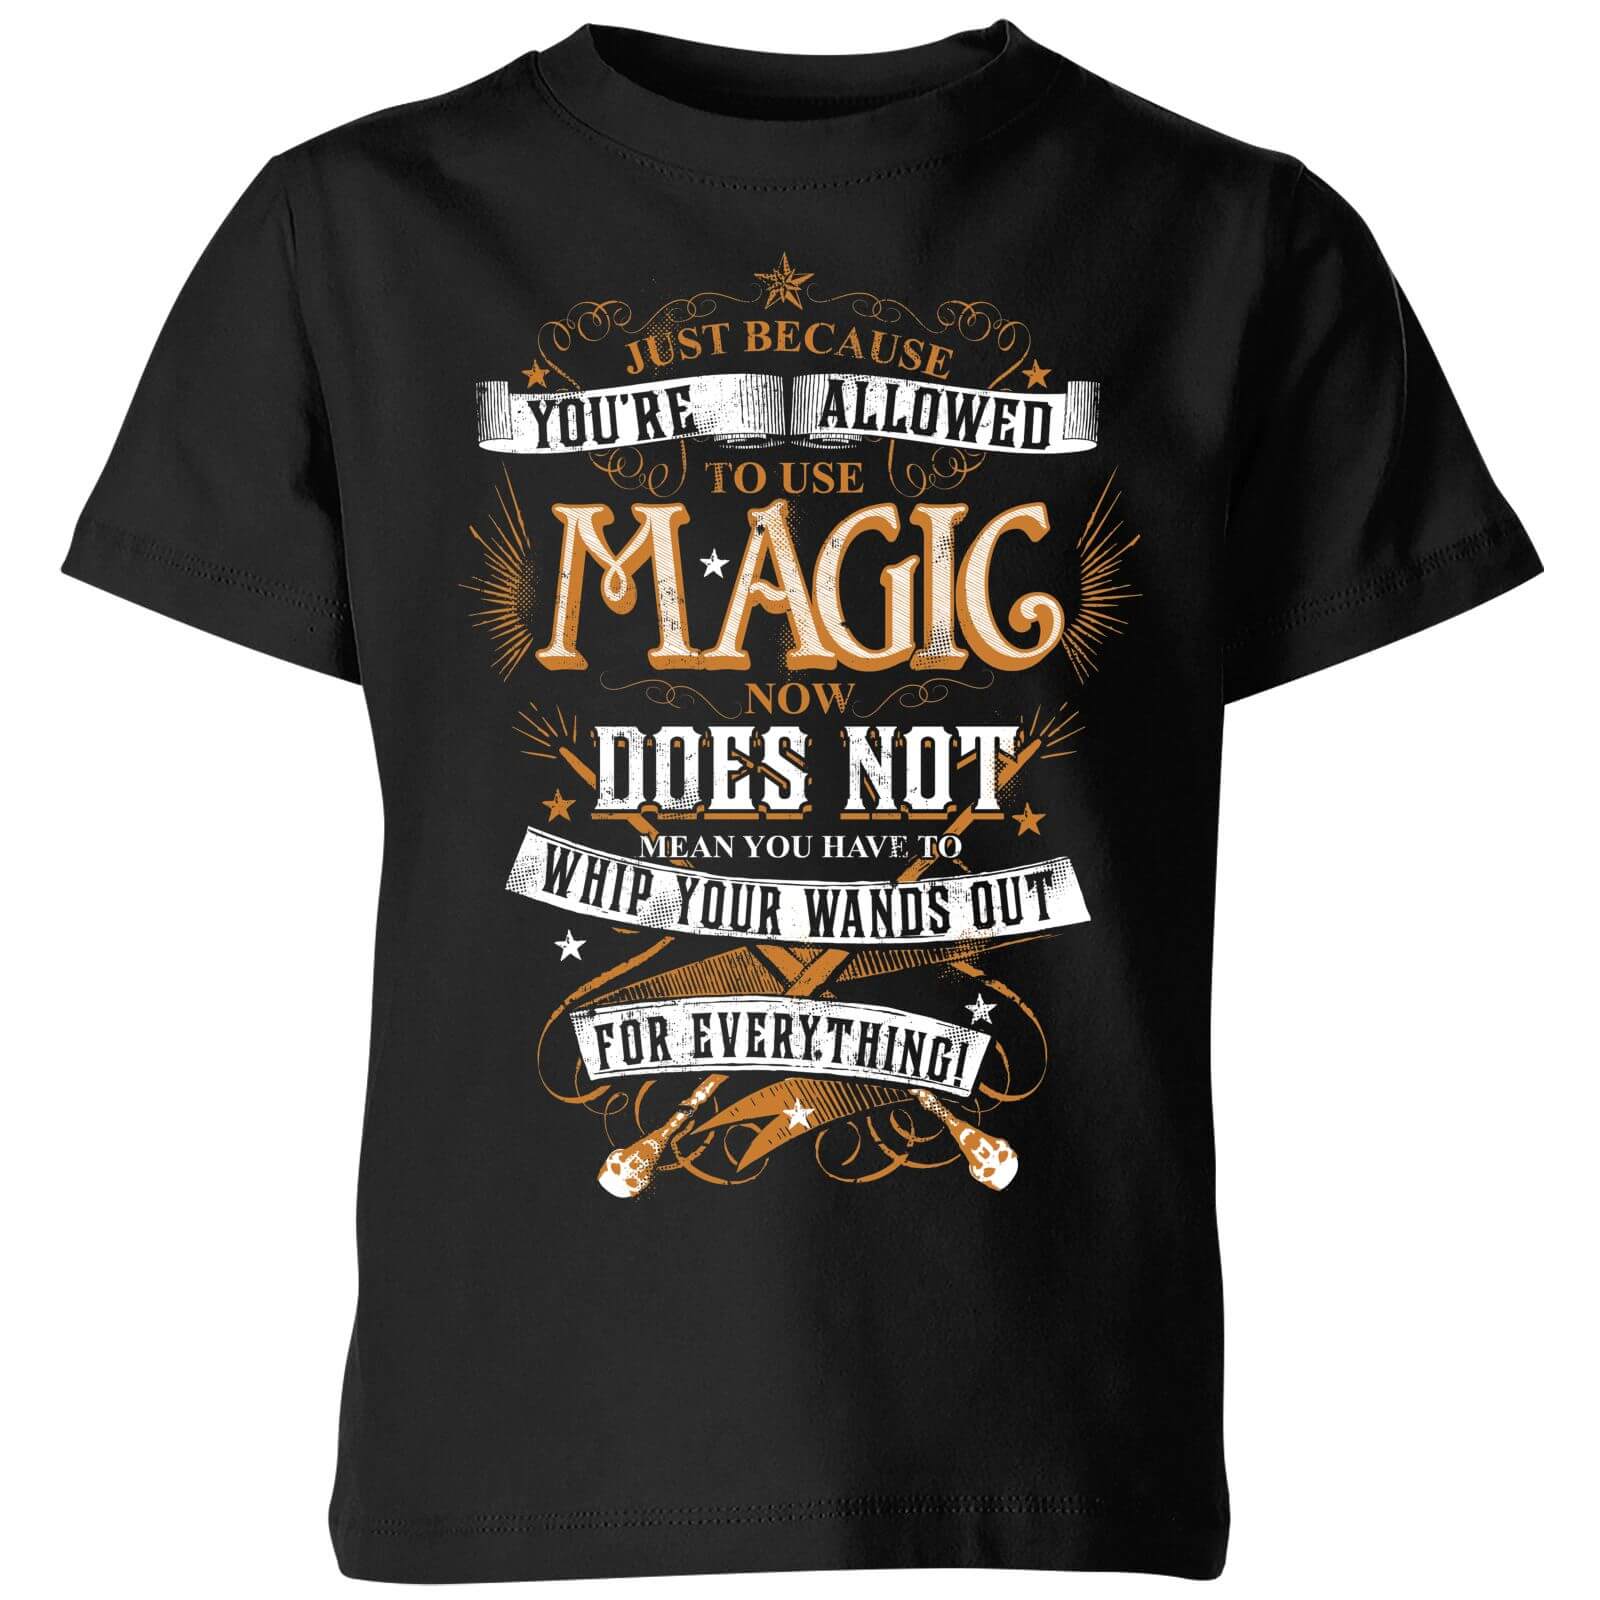 Harry Potter Whip Your Wands Out Kids' T-Shirt - Black - 9-10 Years - Black